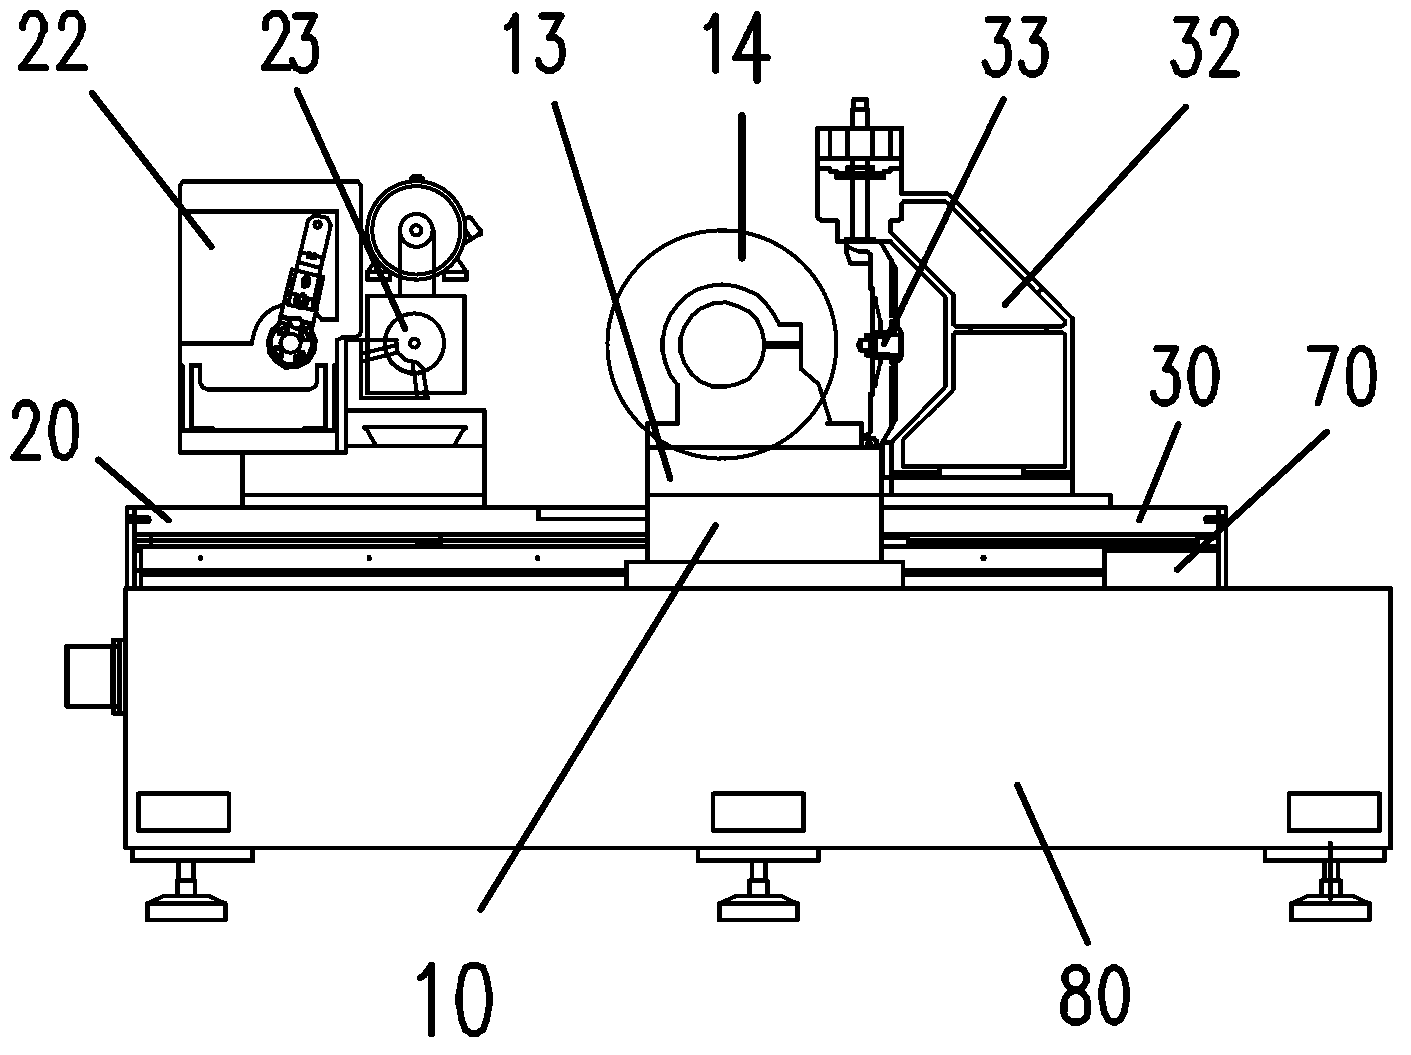 Drag plate structure of numerical control external cylindrical grinding machine